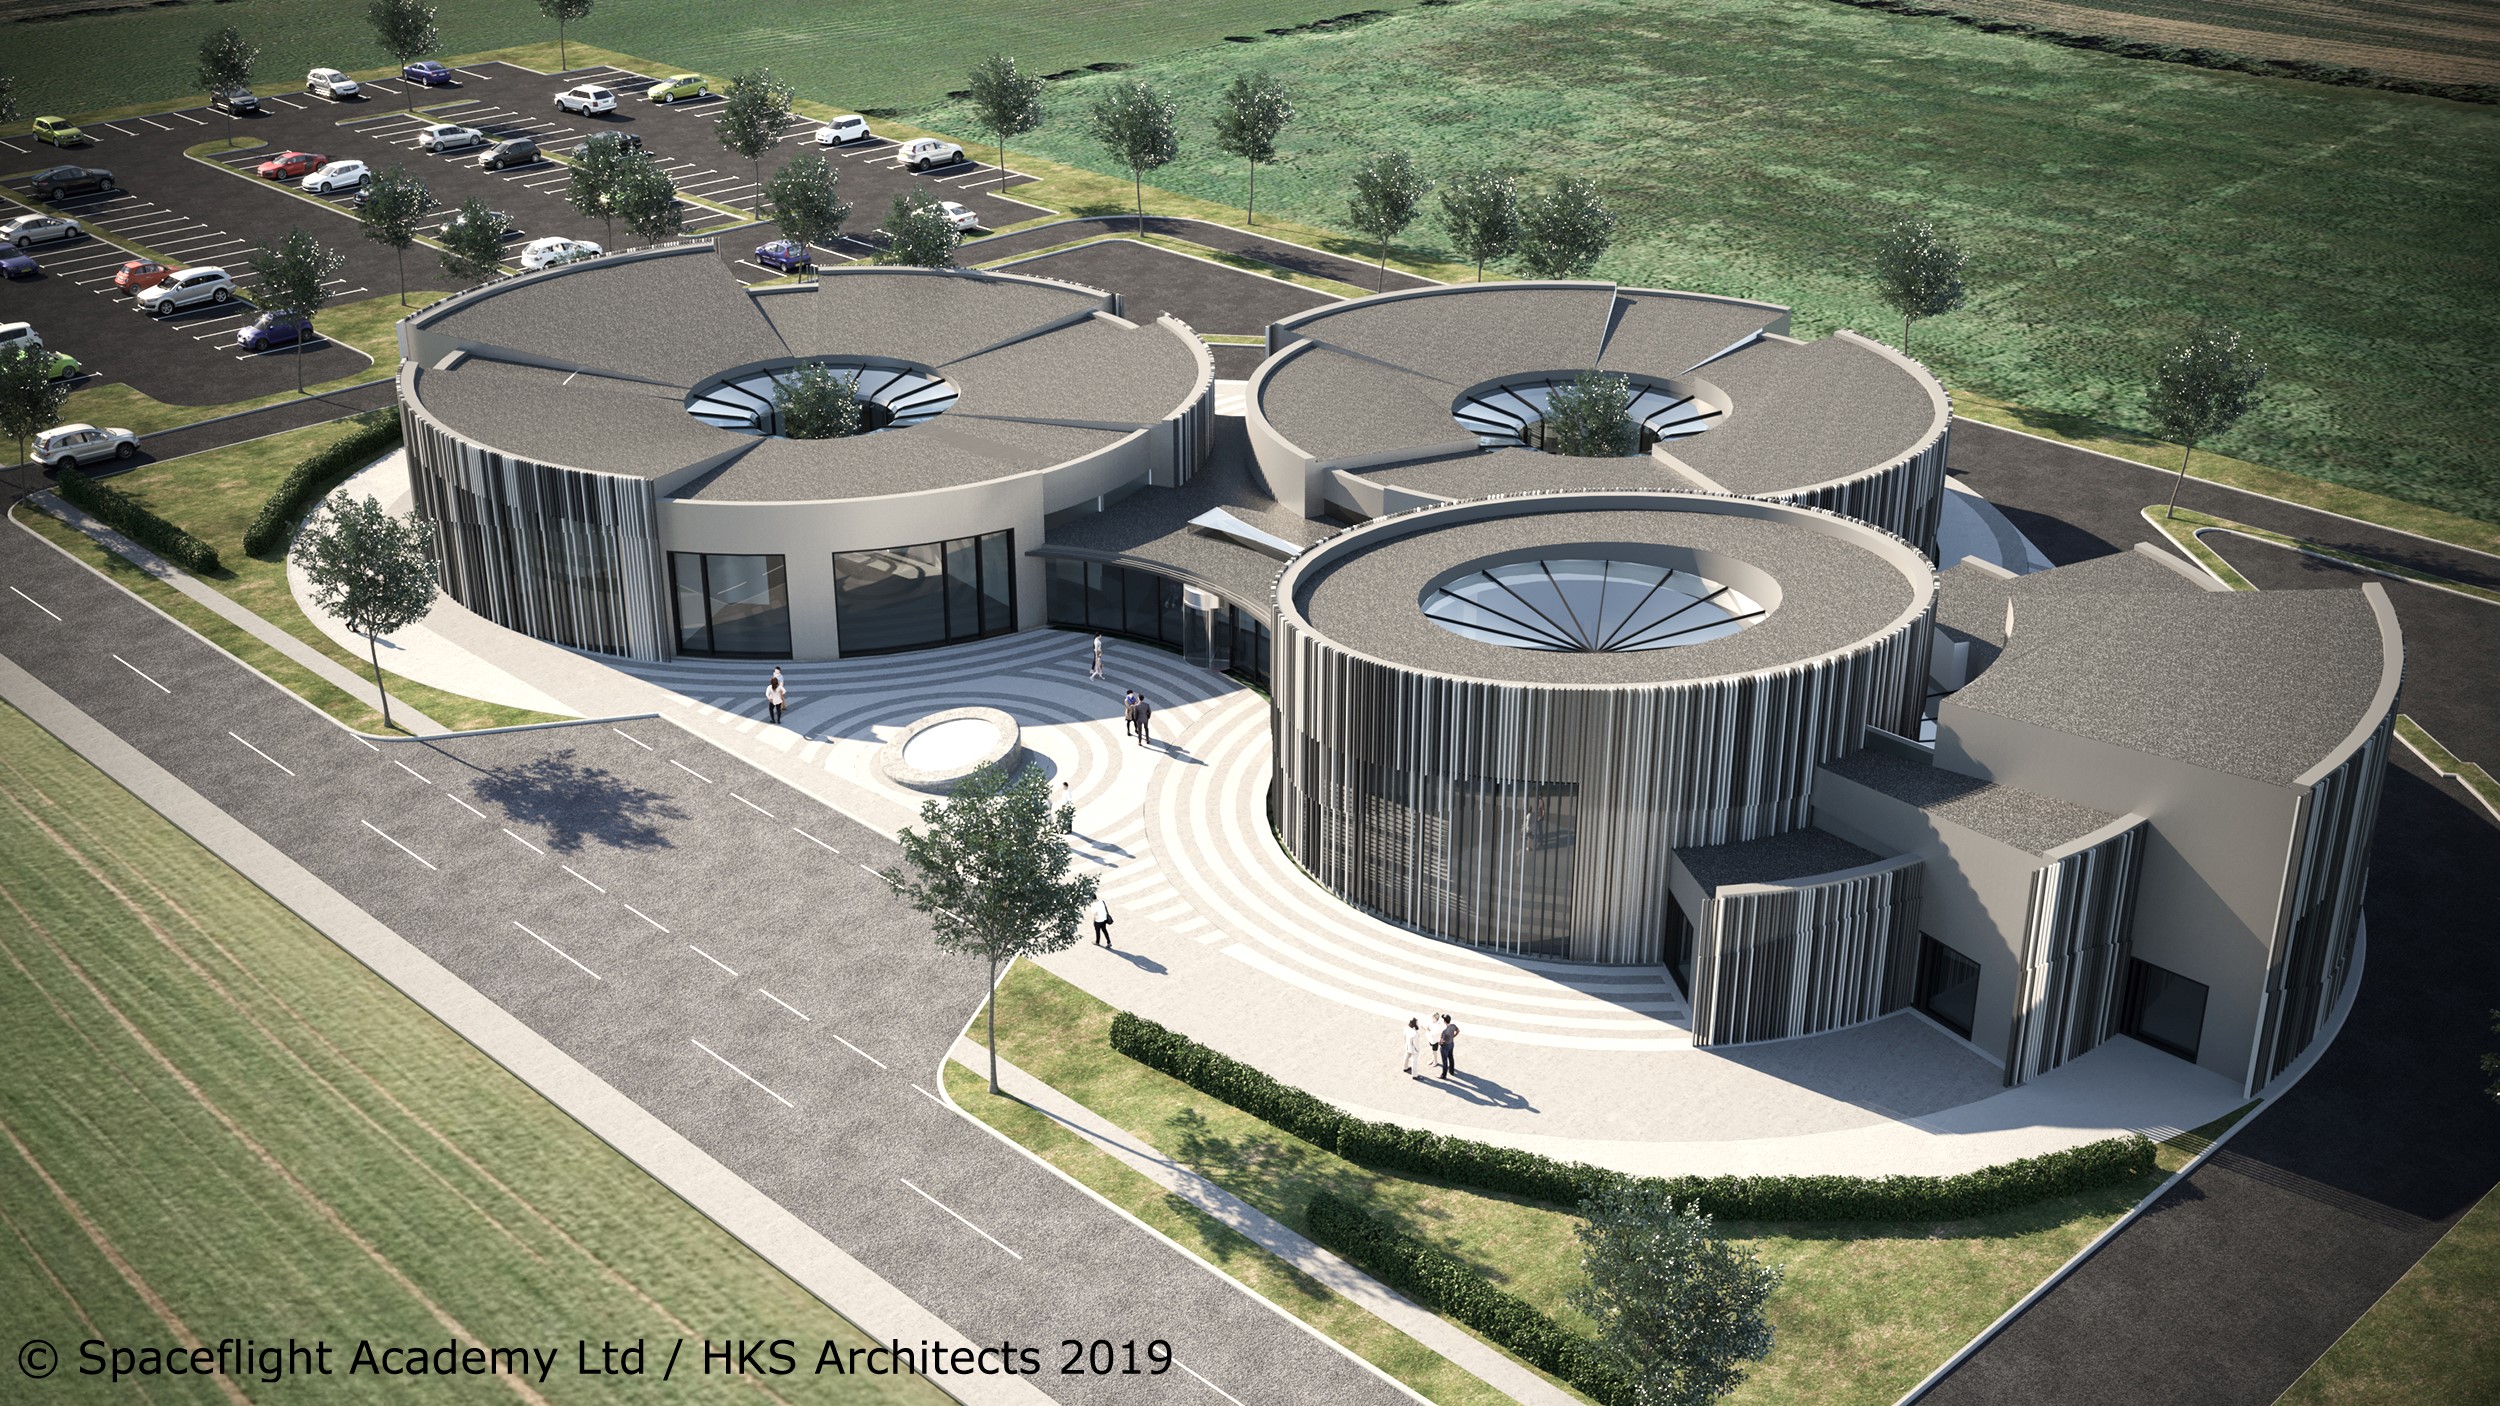 Artist's impression of the Spaceflight Academy as three modern circular buildings.